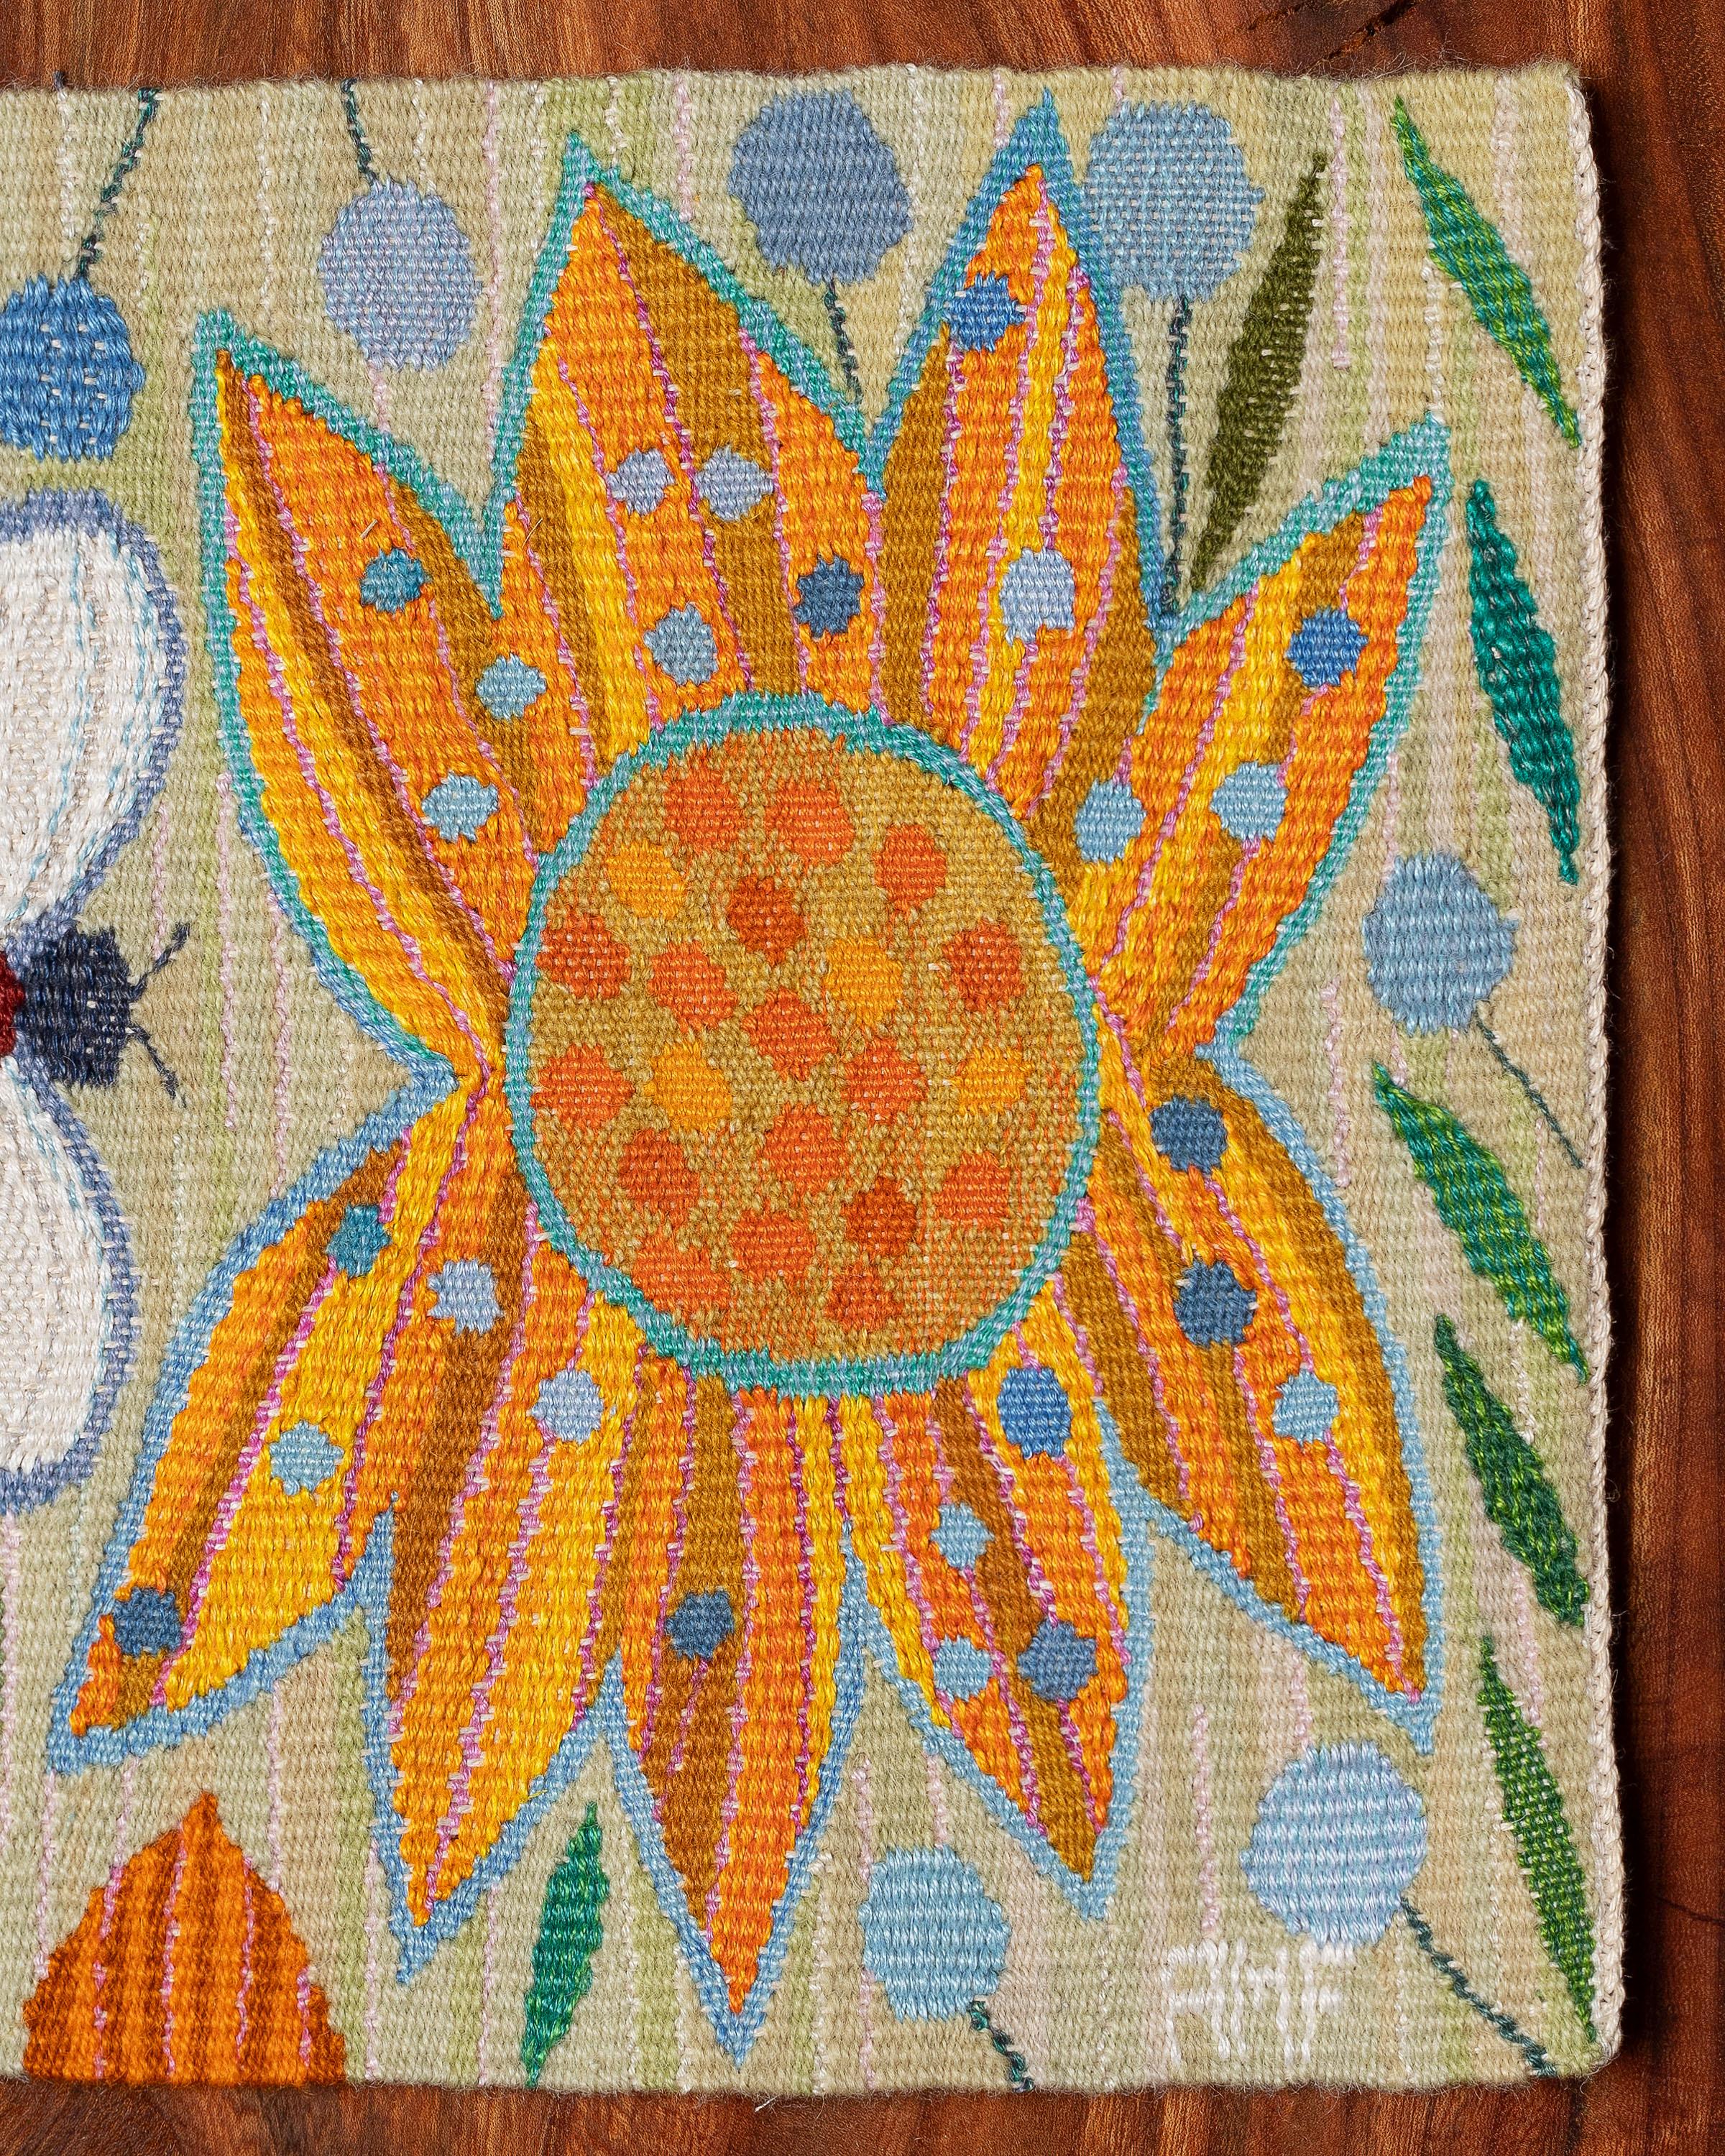 Handwoven tapestry depicting a yellow flower and bee, designed by AnnMari Forsberg in 1959. 

